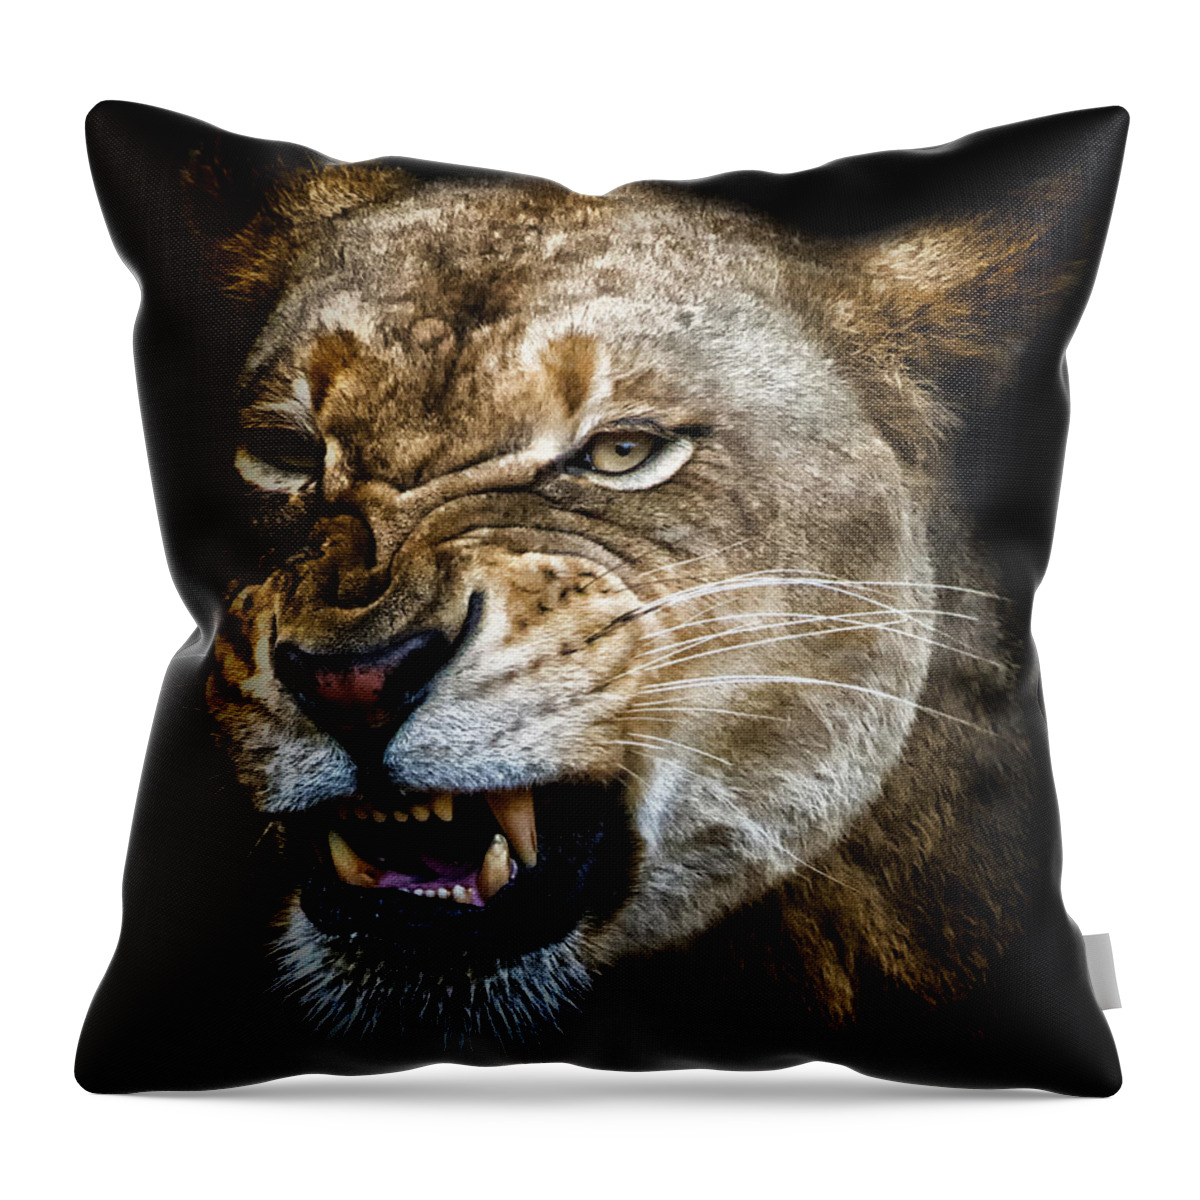 Crystal Yingling Throw Pillow featuring the photograph Snarl by Ghostwinds Photography